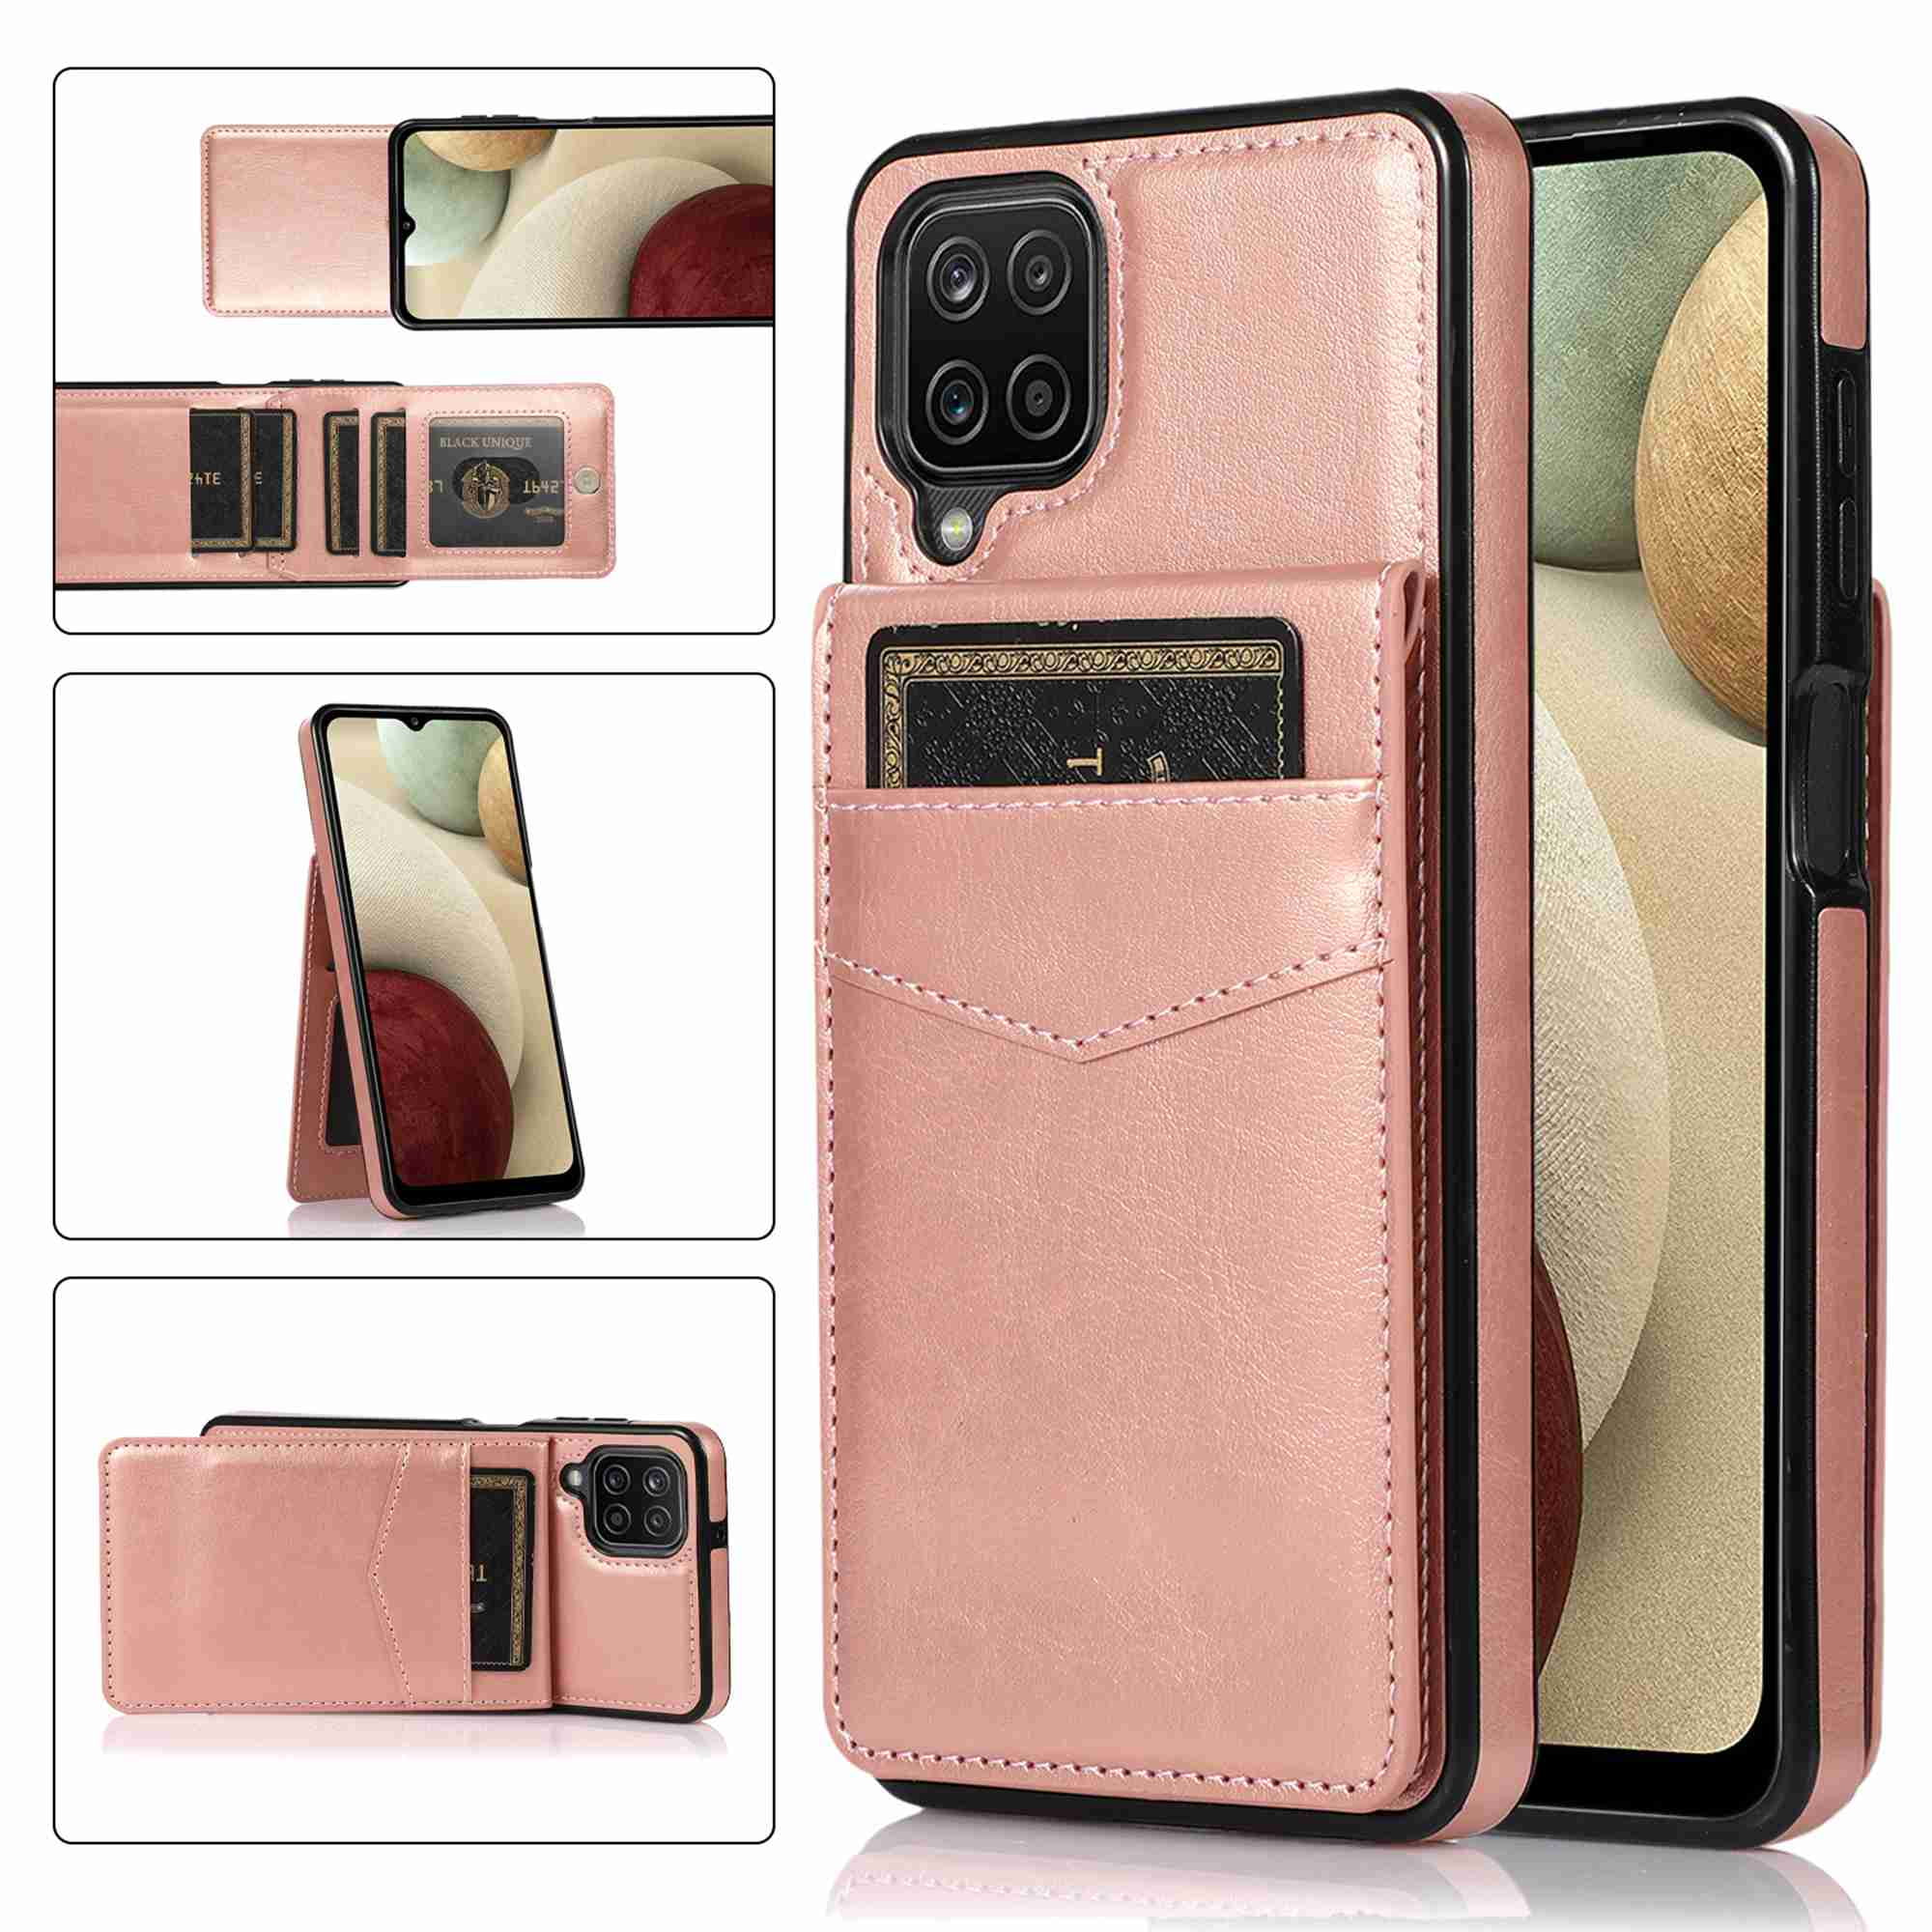 Dteck Back Wallet Phone Case for Samsung Galaxy A12 with ID & Credit Card  Holder Slots Pockets Wallet Back Cover Stand Flip Folio Leather Galaxy A12  